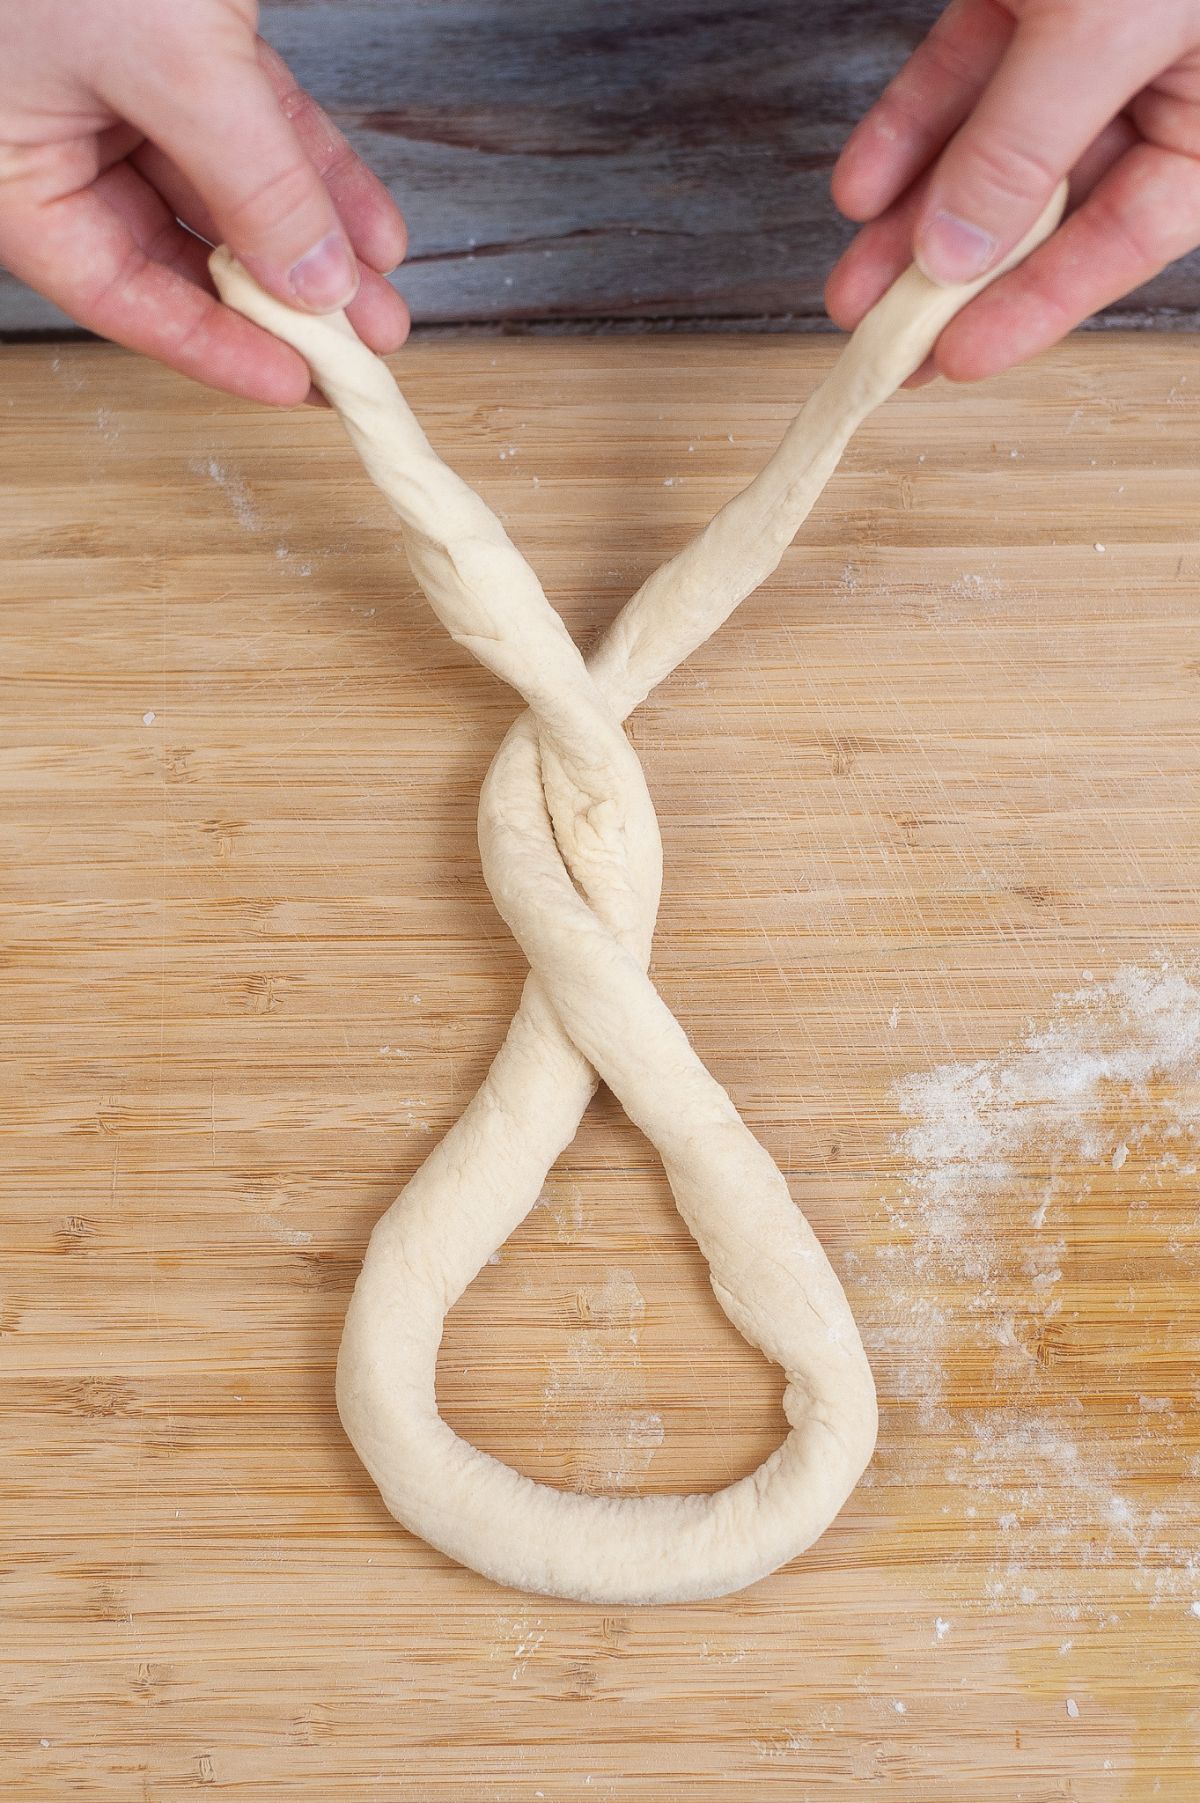 Pretzel dough is twisted by hand on a wooden chopping board.